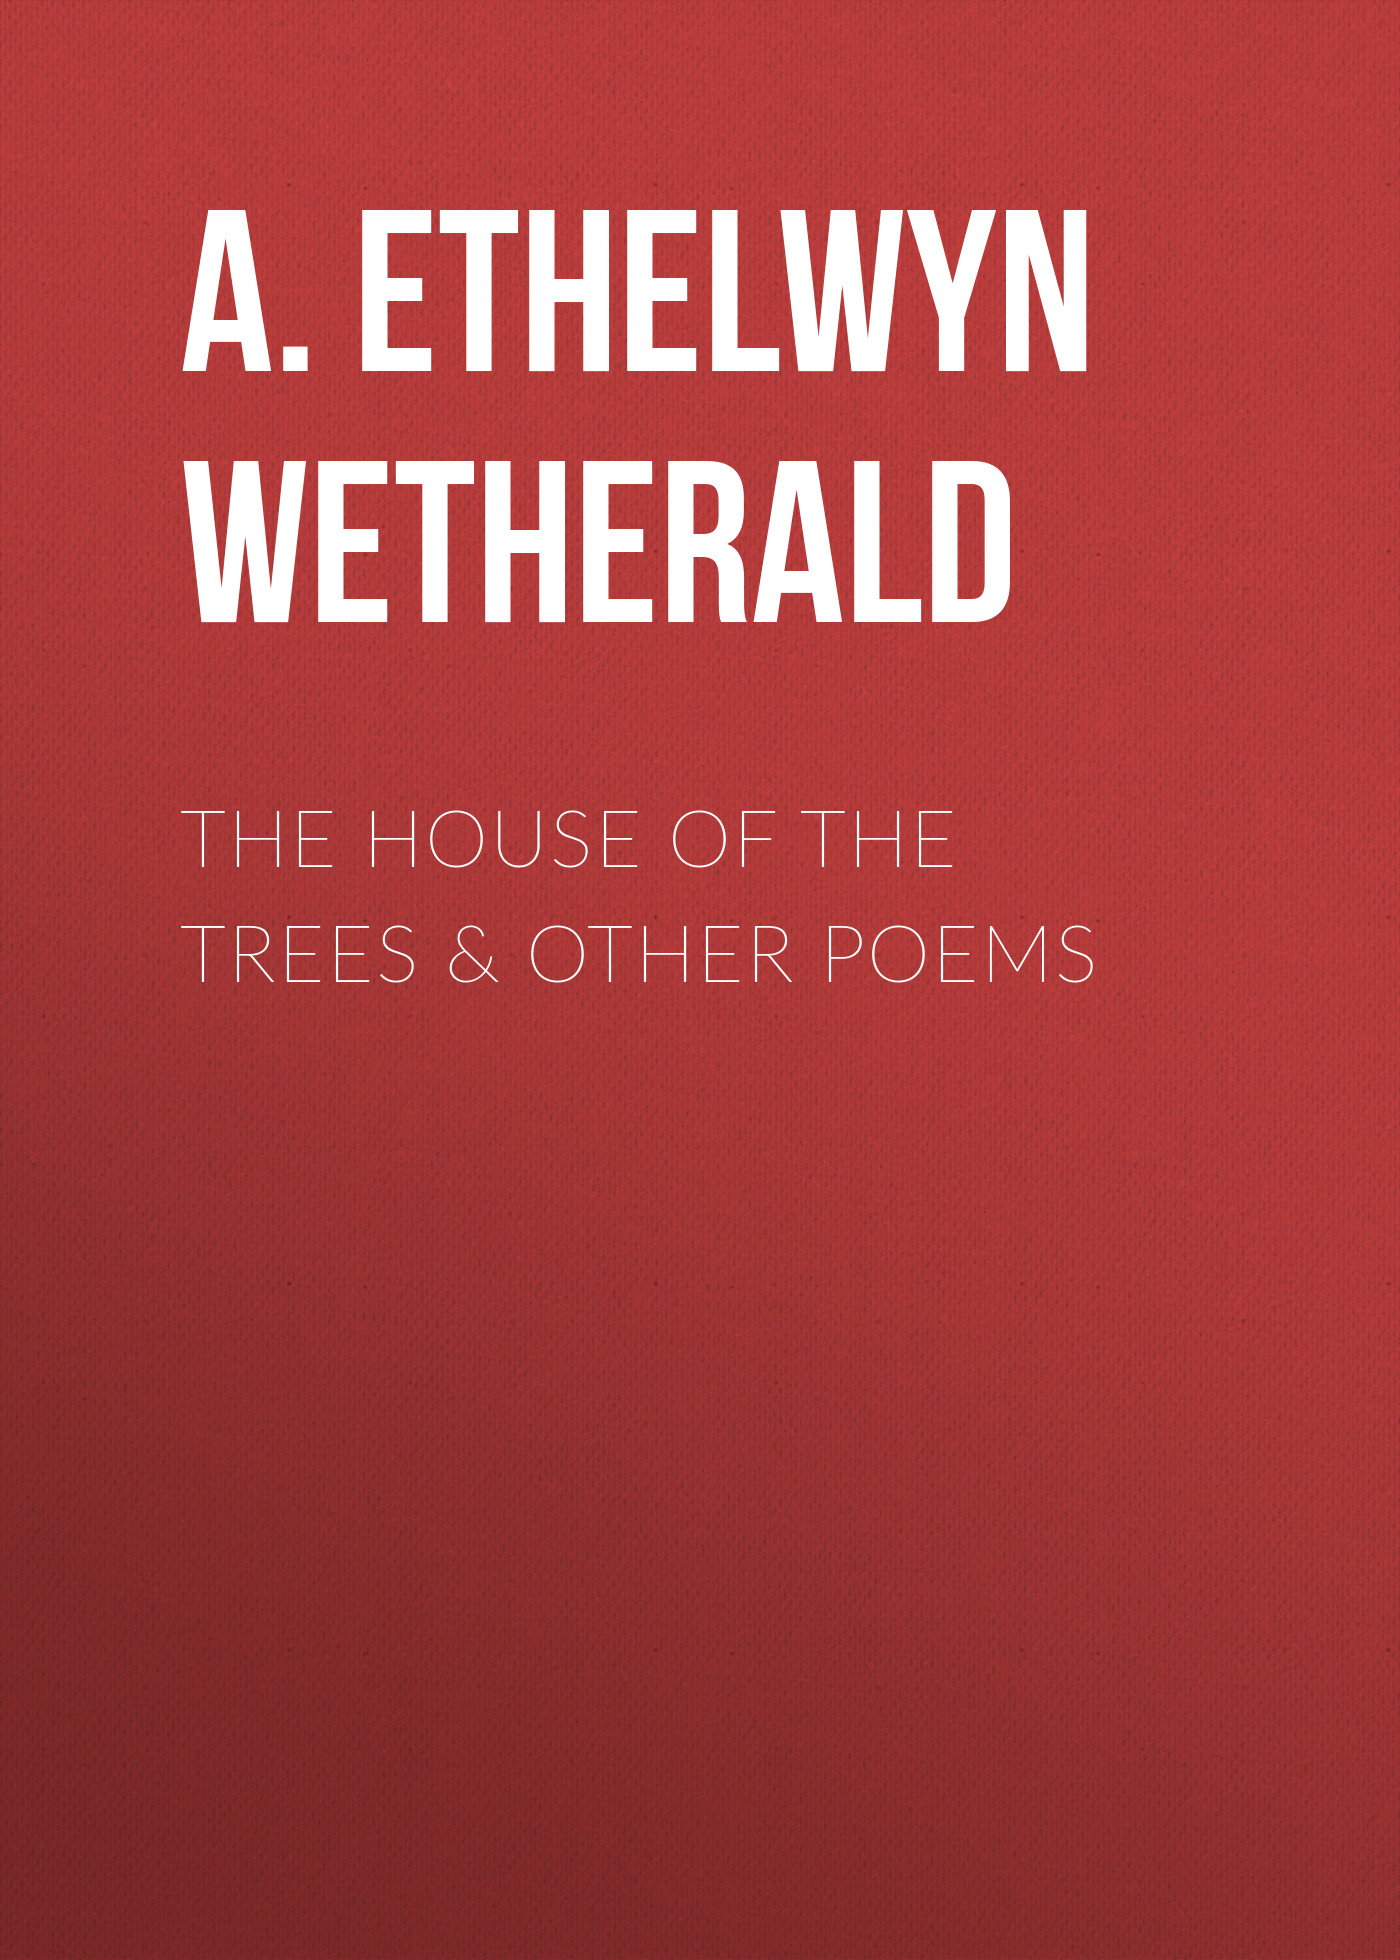 The House of the Trees&Other Poems